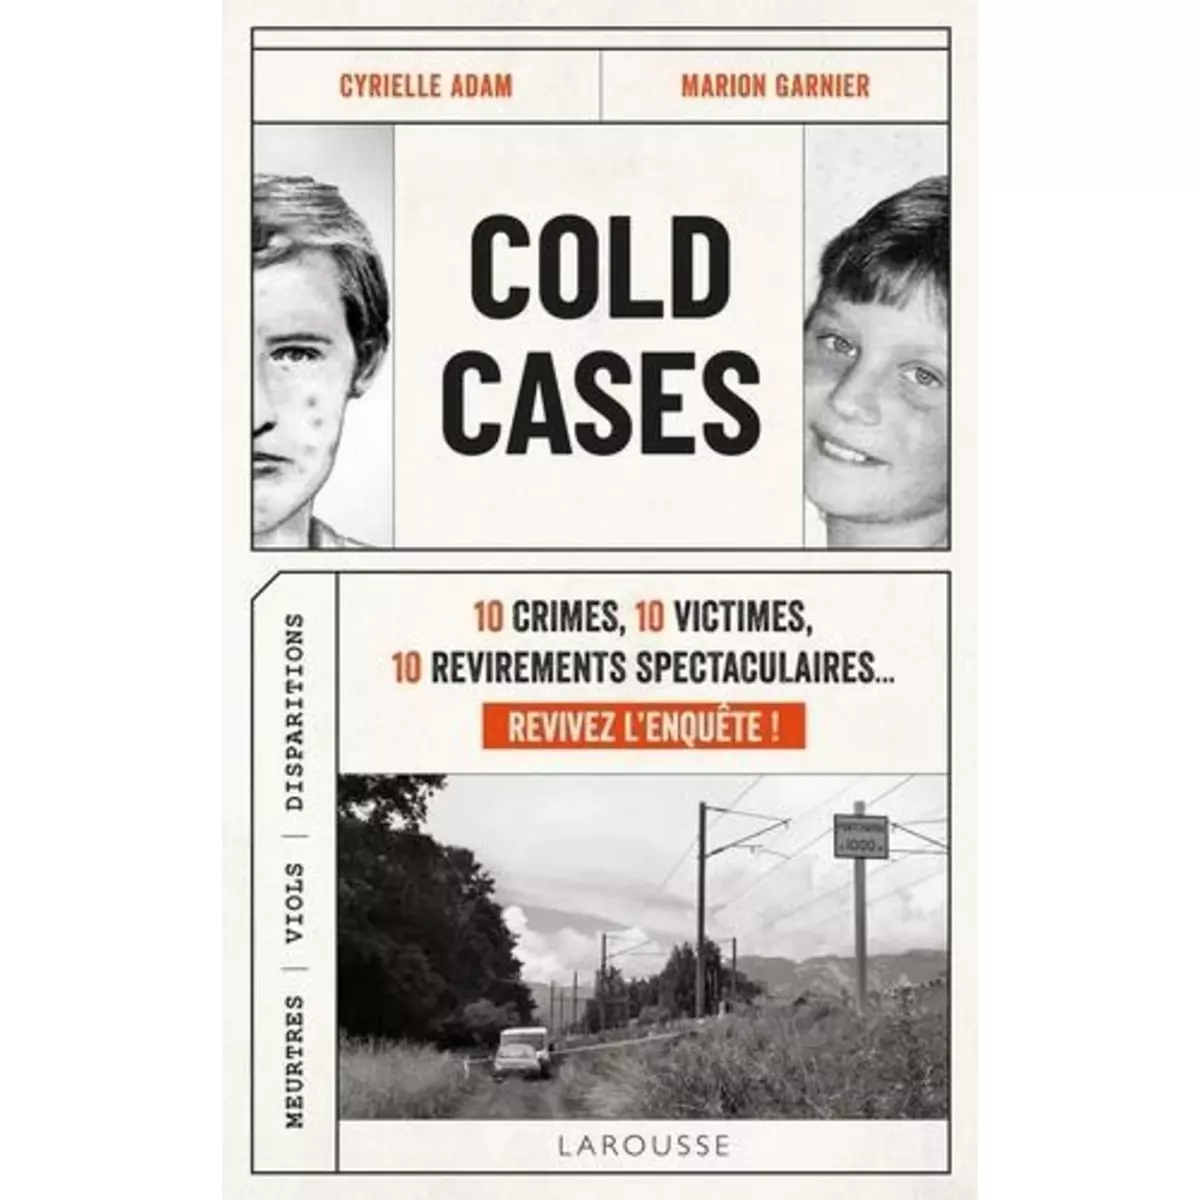  COLD CASES, Adam Cyrielle